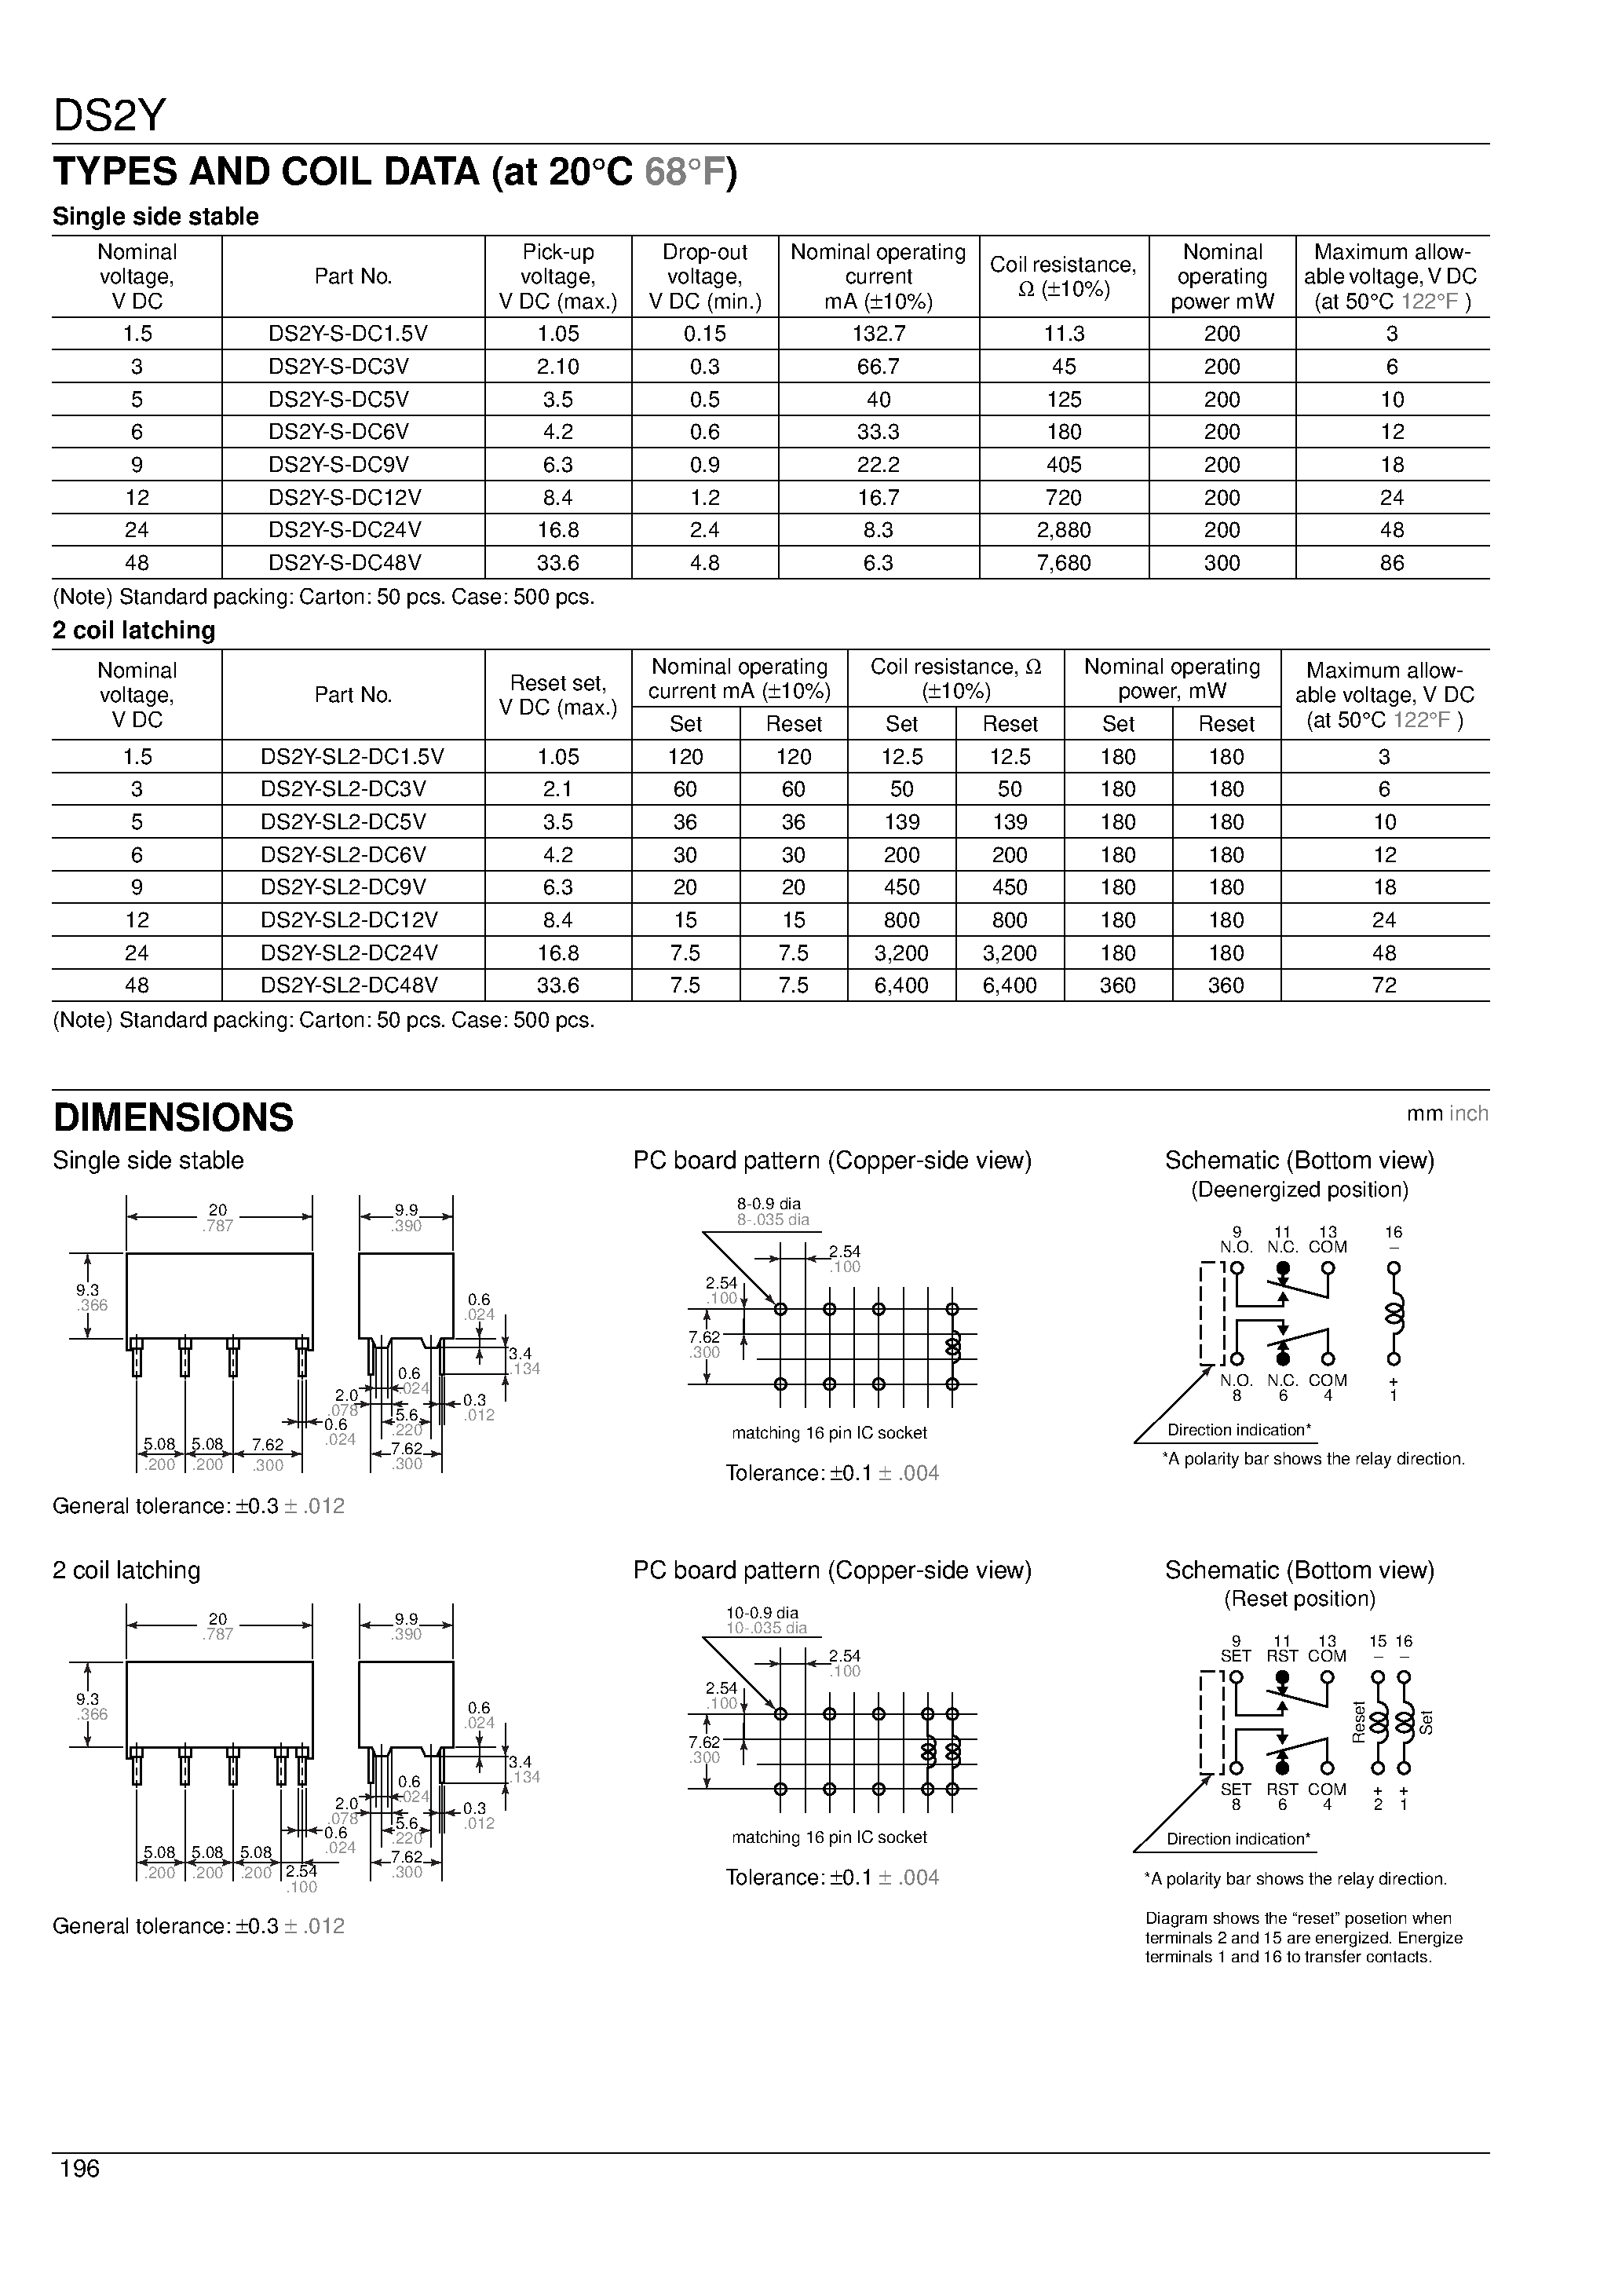 Datasheet DS2Y-S-DC5V - 2 Form C contact High sensitivity-200 mW nominal operating power page 2